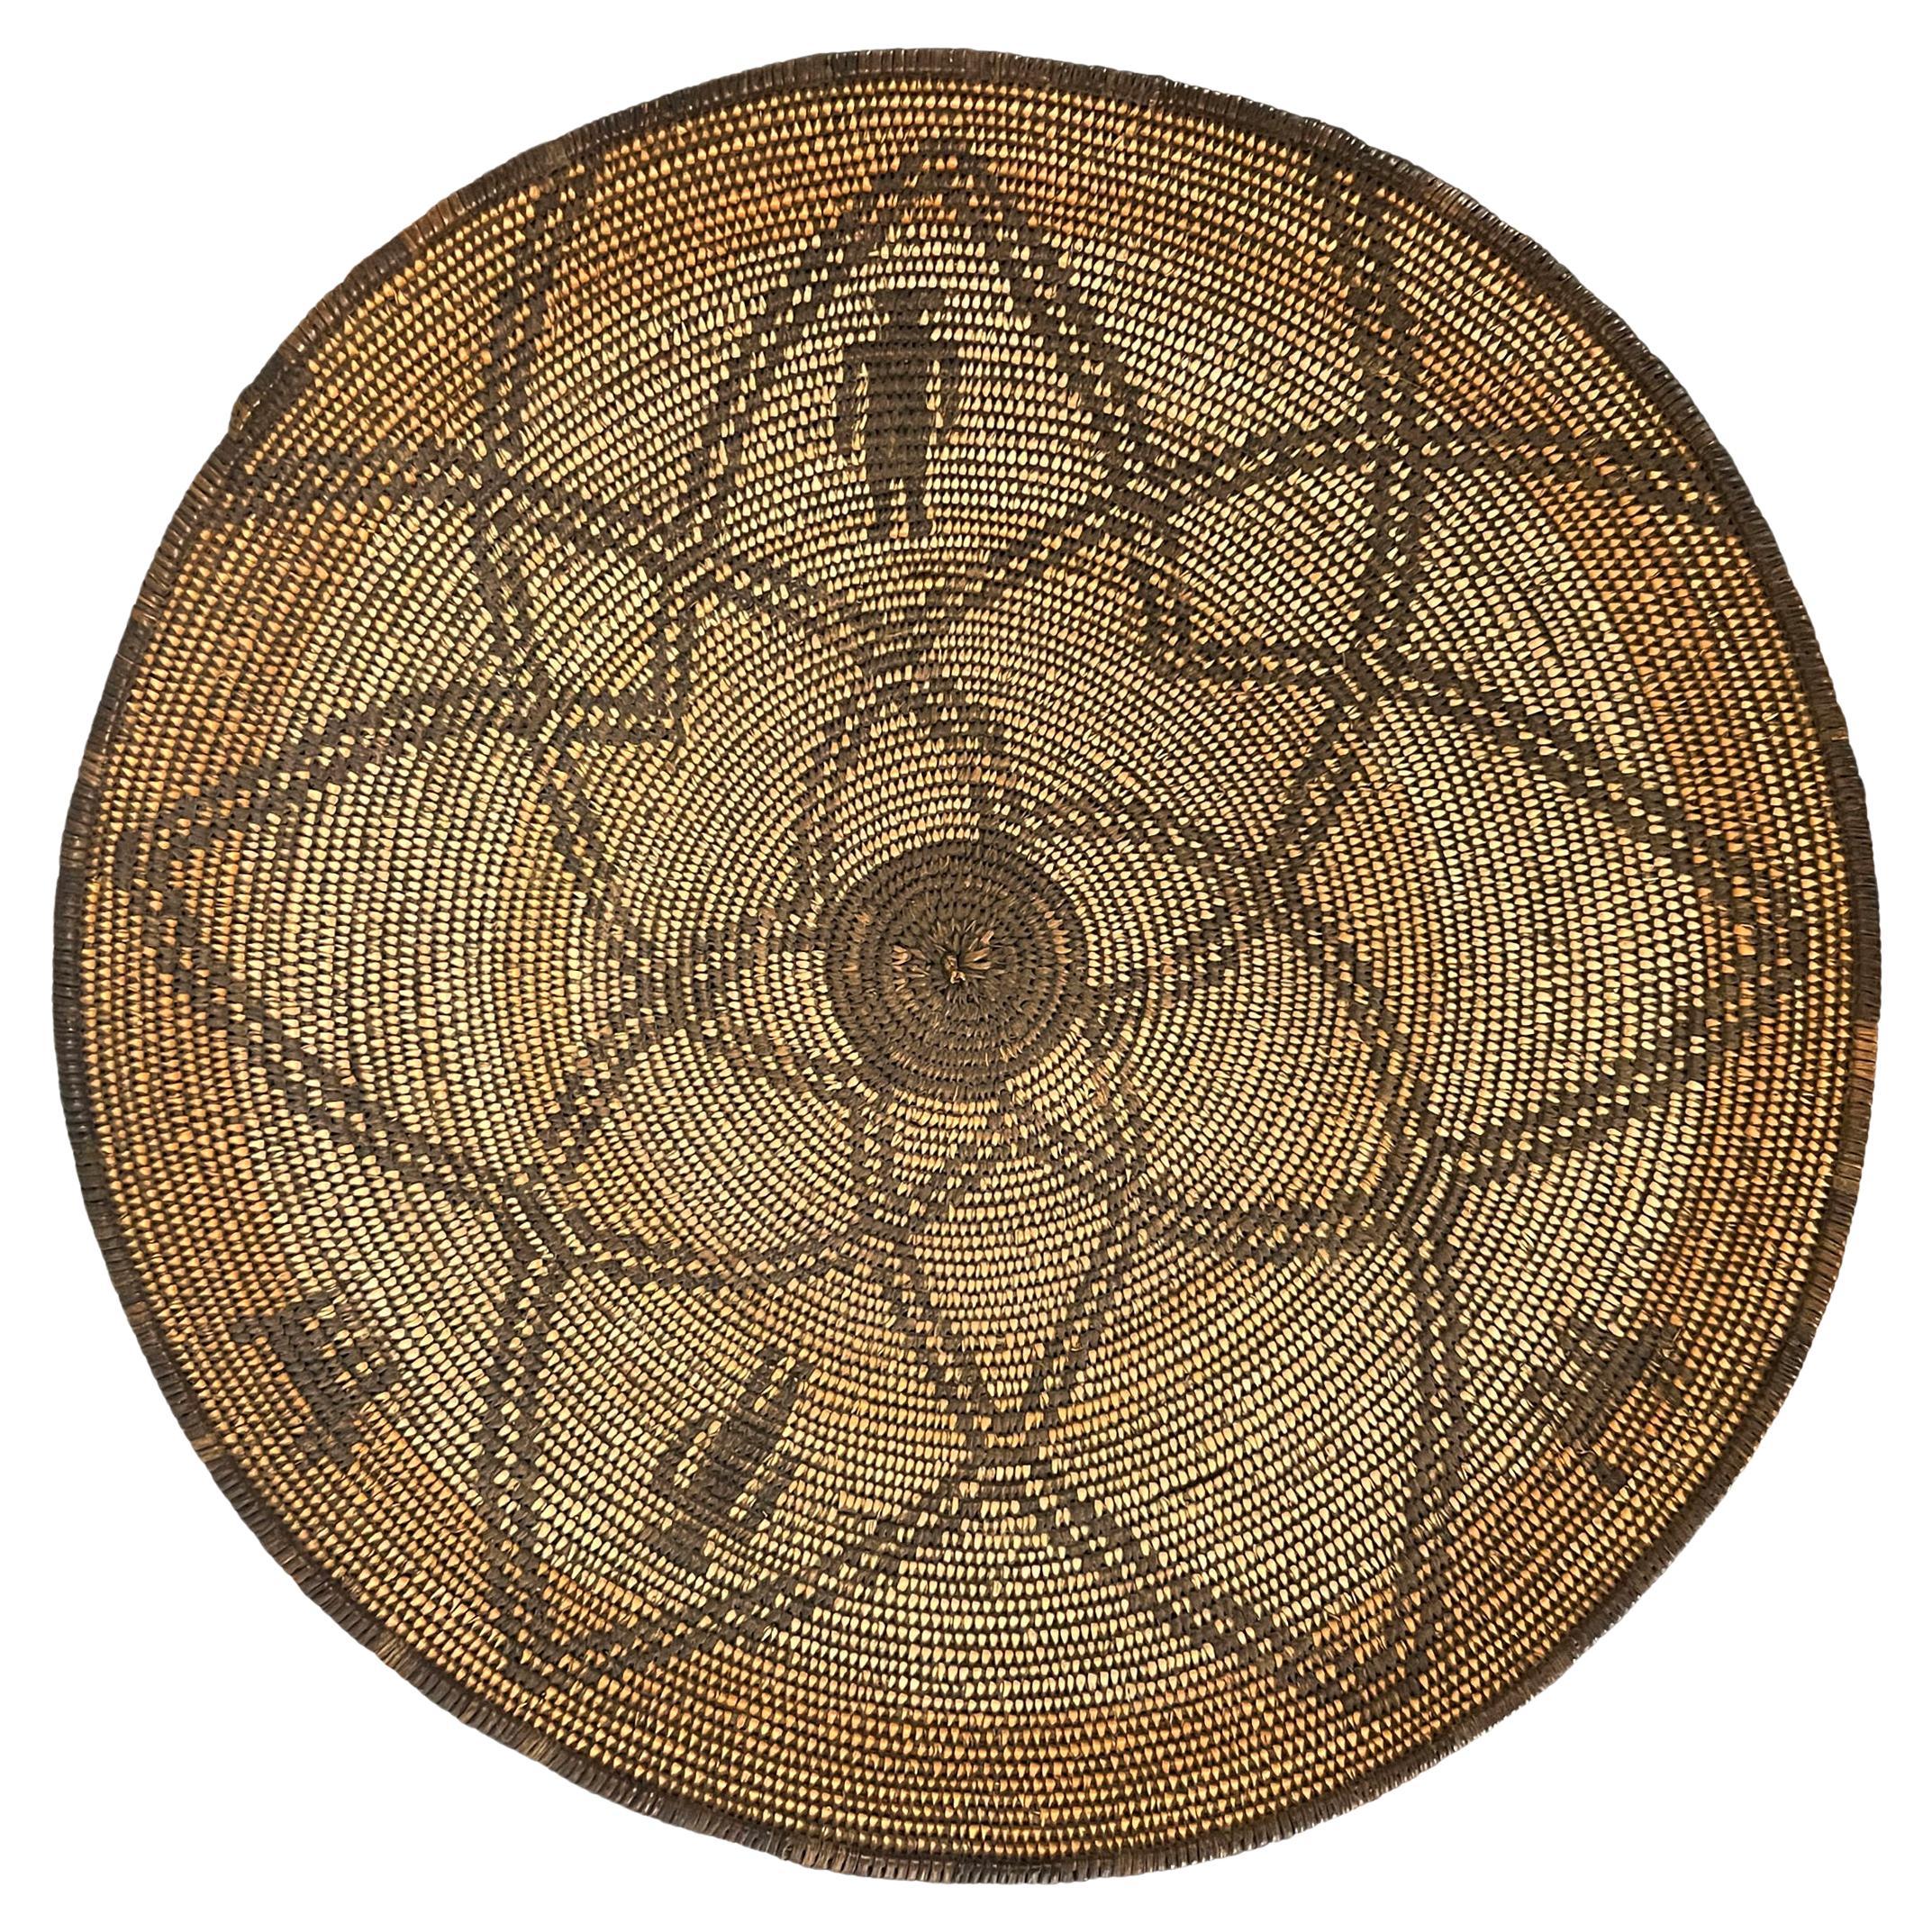 Early 20th Century Apache Tray Basket